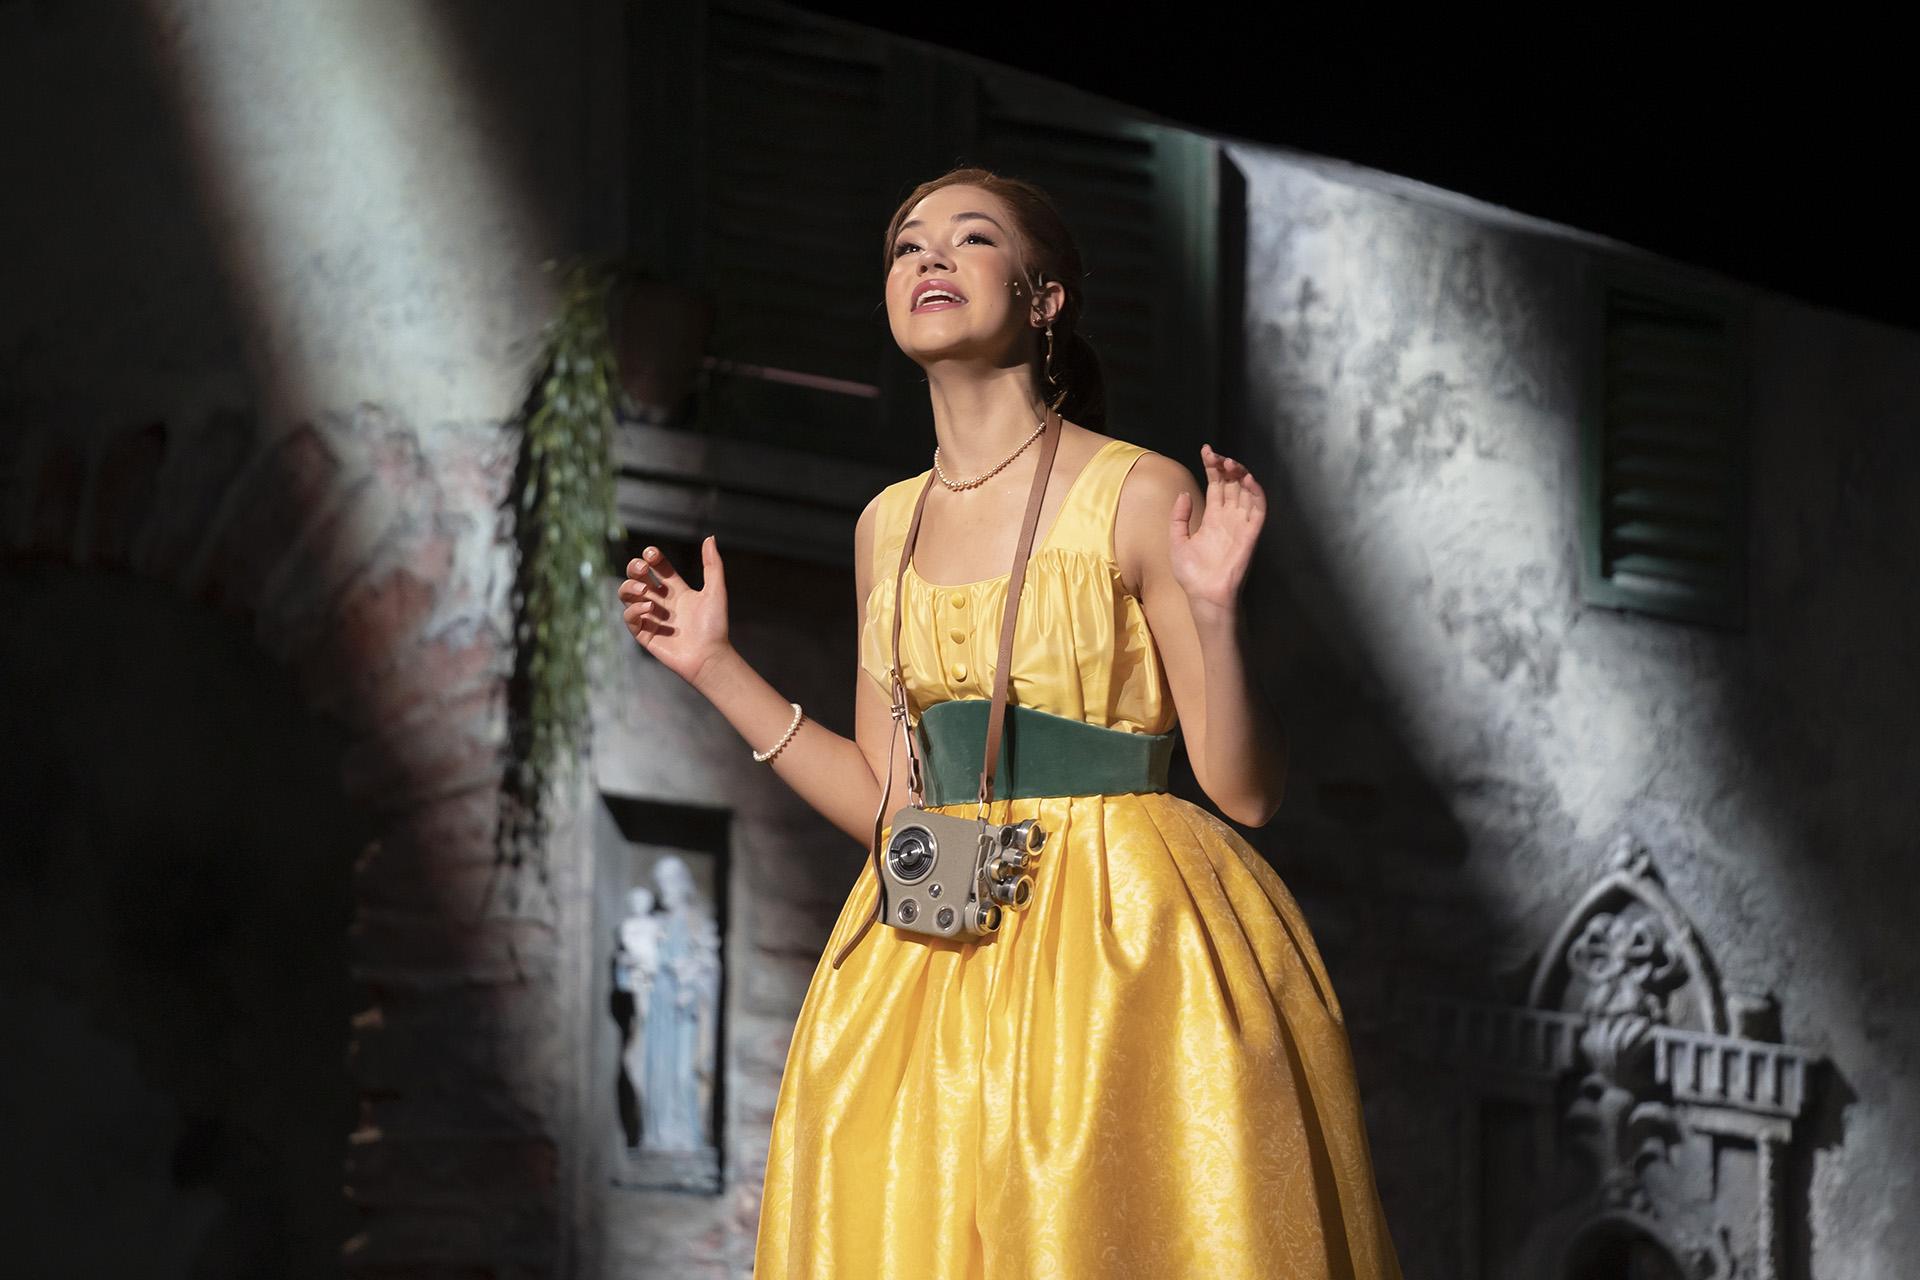 Solea Pfeiffer in “The Light in the Piazza" at Lyric Opera House. (Photo by Liz Lauren)